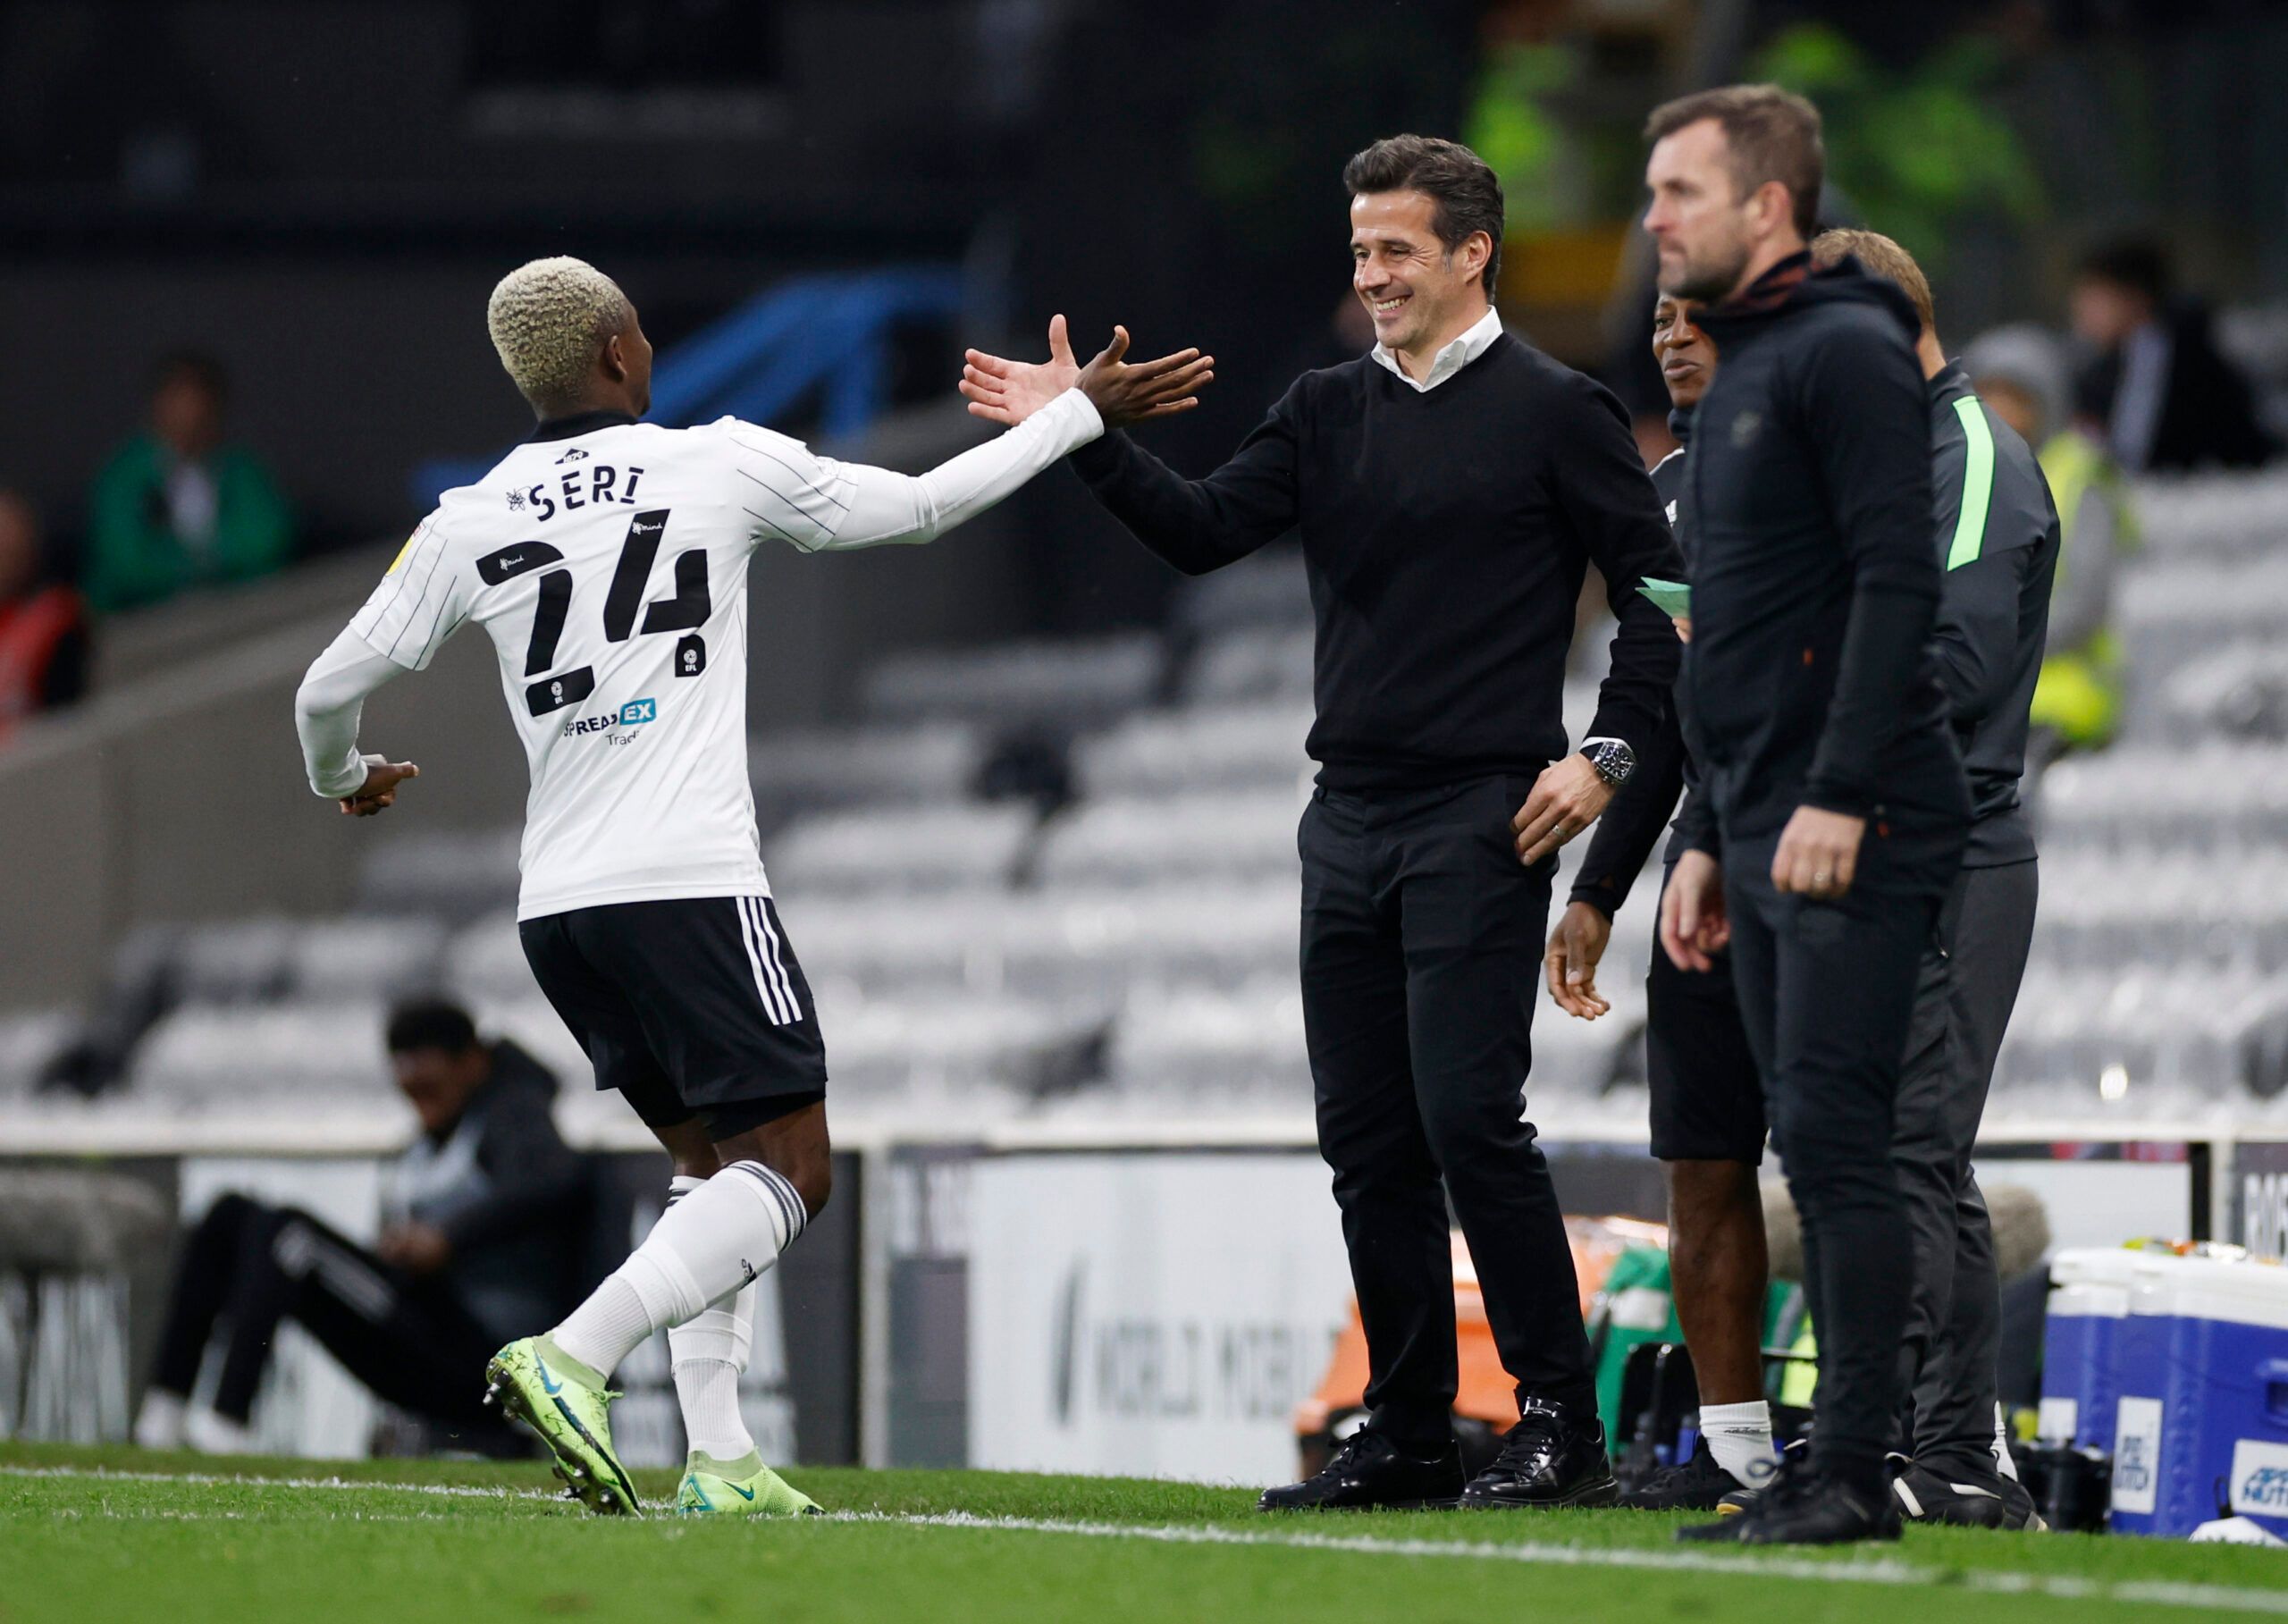 Soccer Football - Championship - Fulham v Luton Town - Craven Cottage, London, Britain- May 2, 2022 Fulham's Jean Michael Seri celebrates scoring their sixth goal with Fulham manager Marco Silva Action Images/John Sibley EDITORIAL USE ONLY. No use with unauthorized audio, video, data, fixture lists, club/league logos or 'live' services. Online in-match use limited to 75 images, no video emulation. No use in betting, games or single club /league/player publications.  Please contact your account r